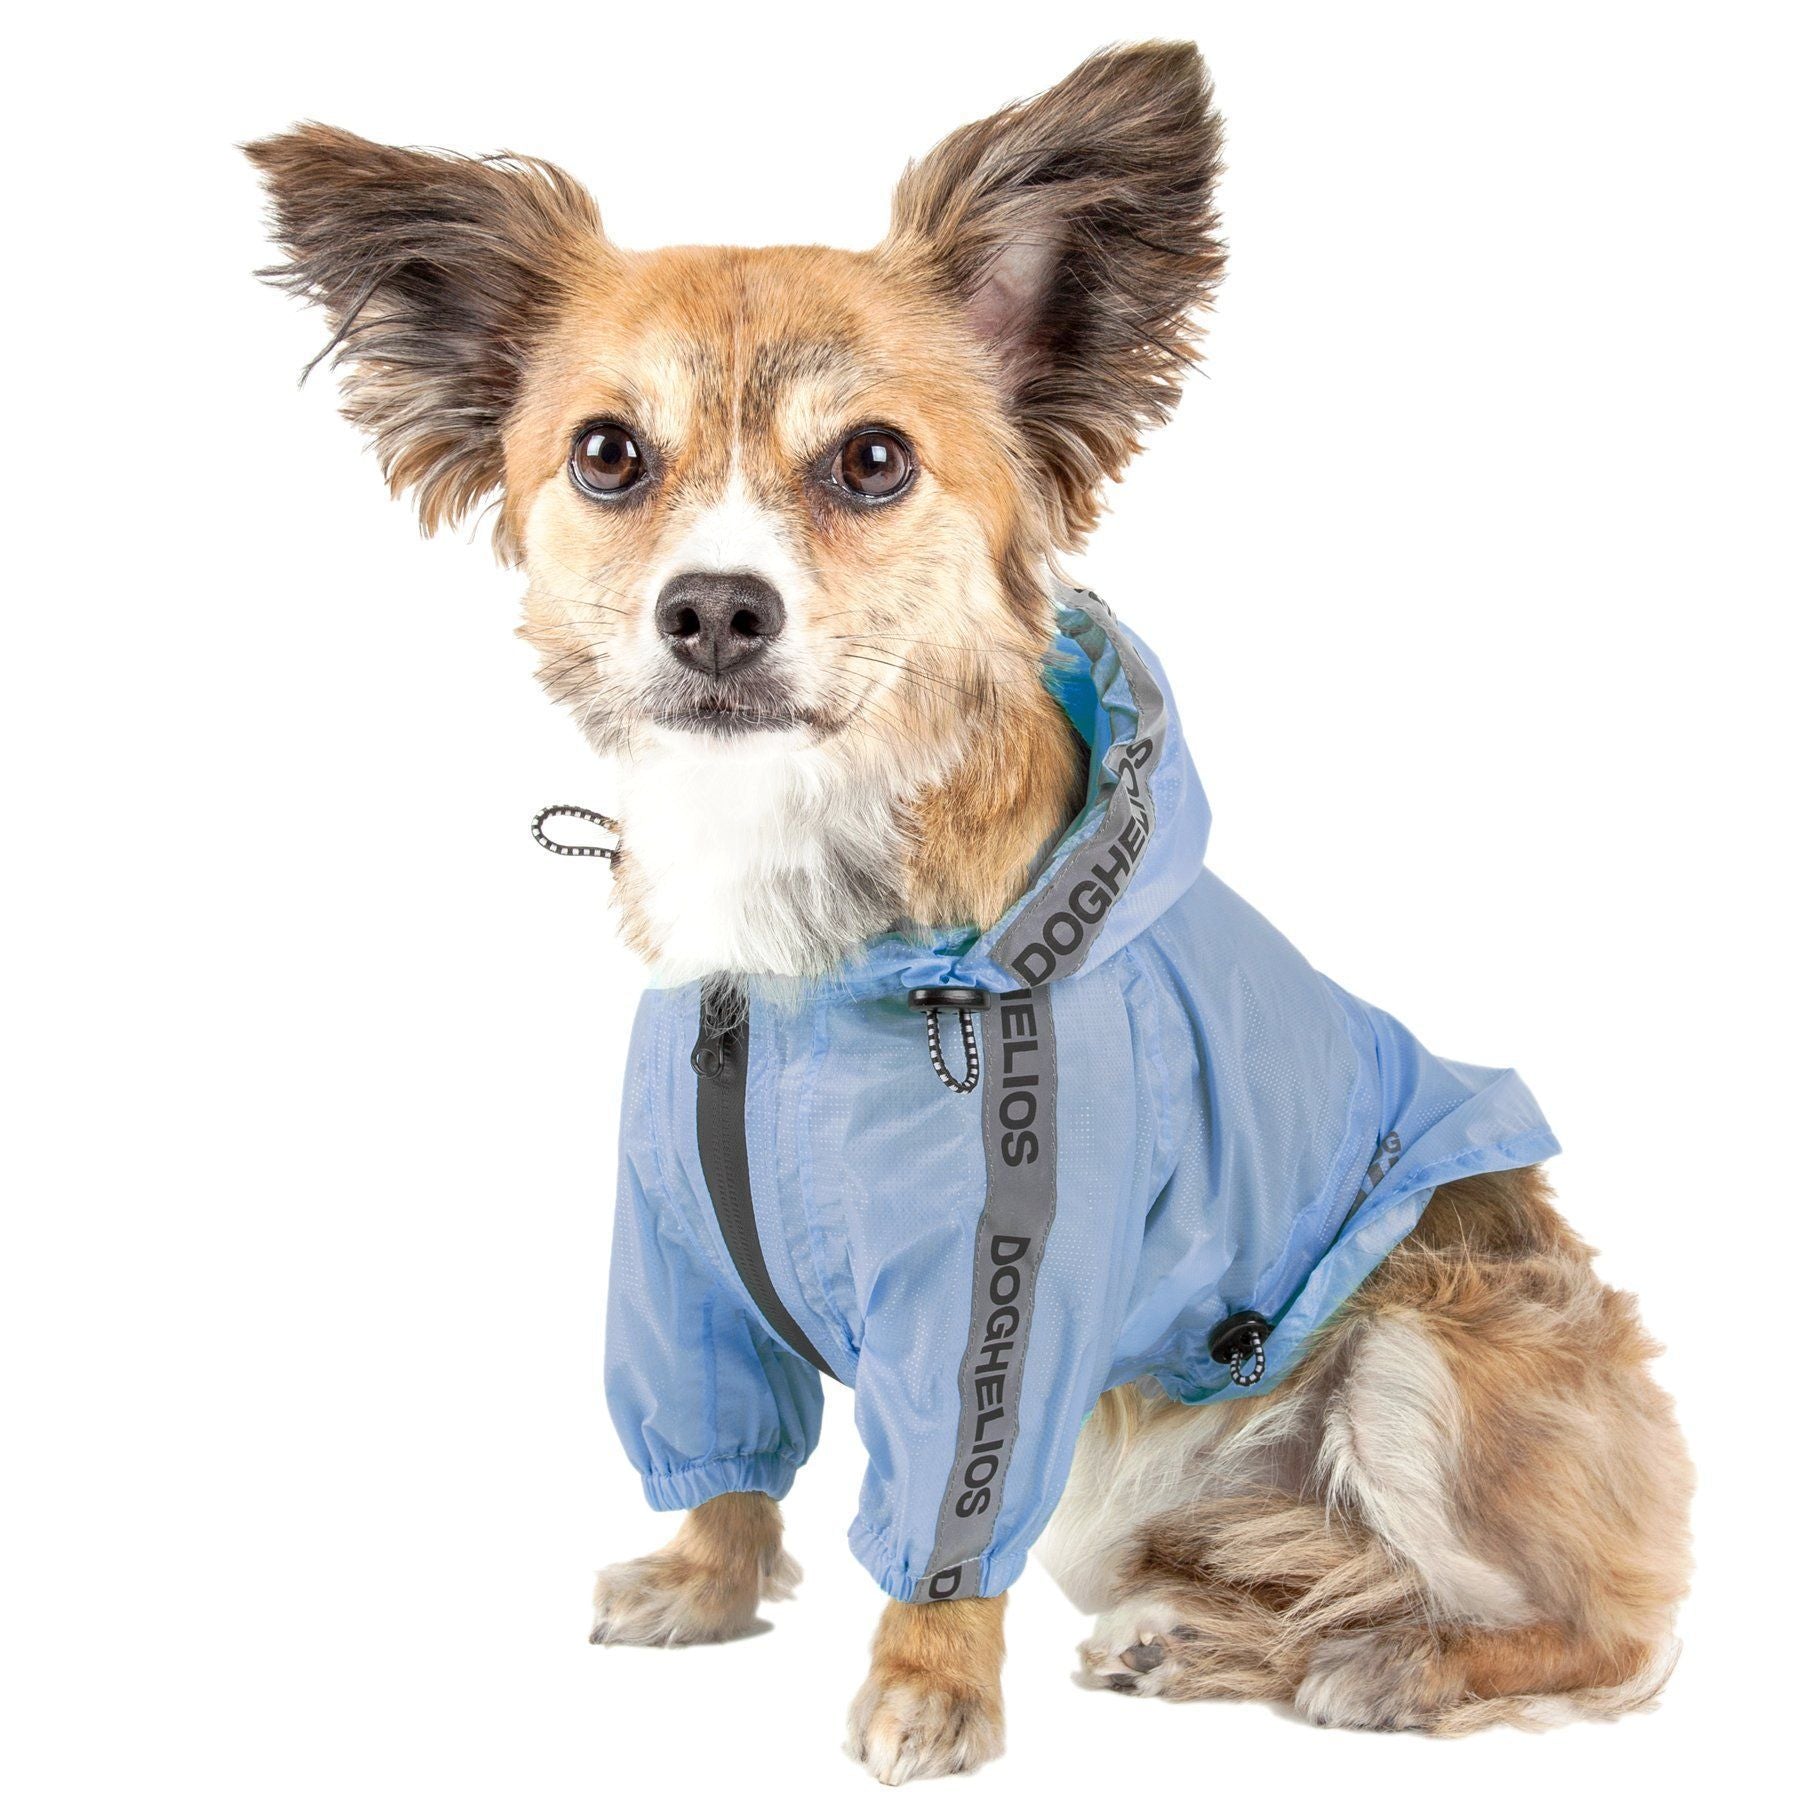 Dog Helios ® 'Torrential Shield' Adjustable and Waterproof Dog Raincoat Poncho X-Small Royal Blue